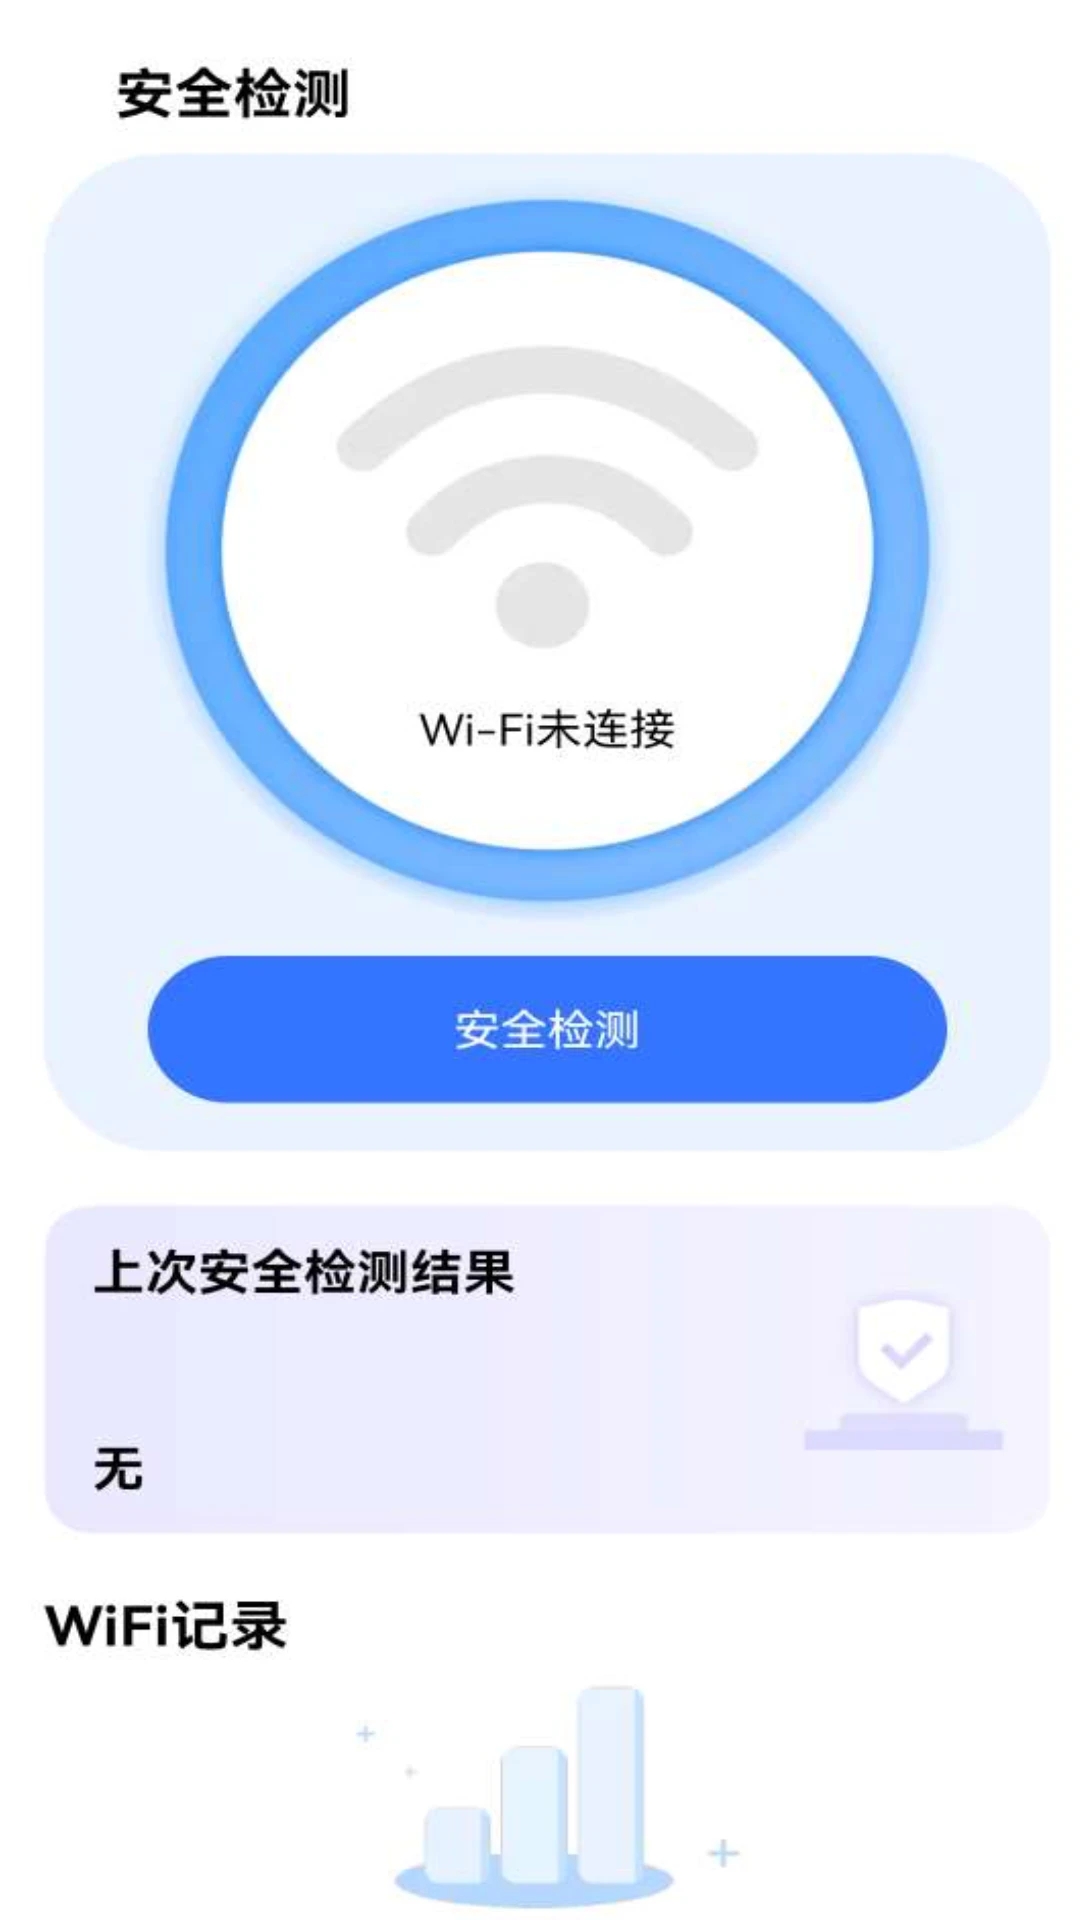 WiFiv2.0.1 °